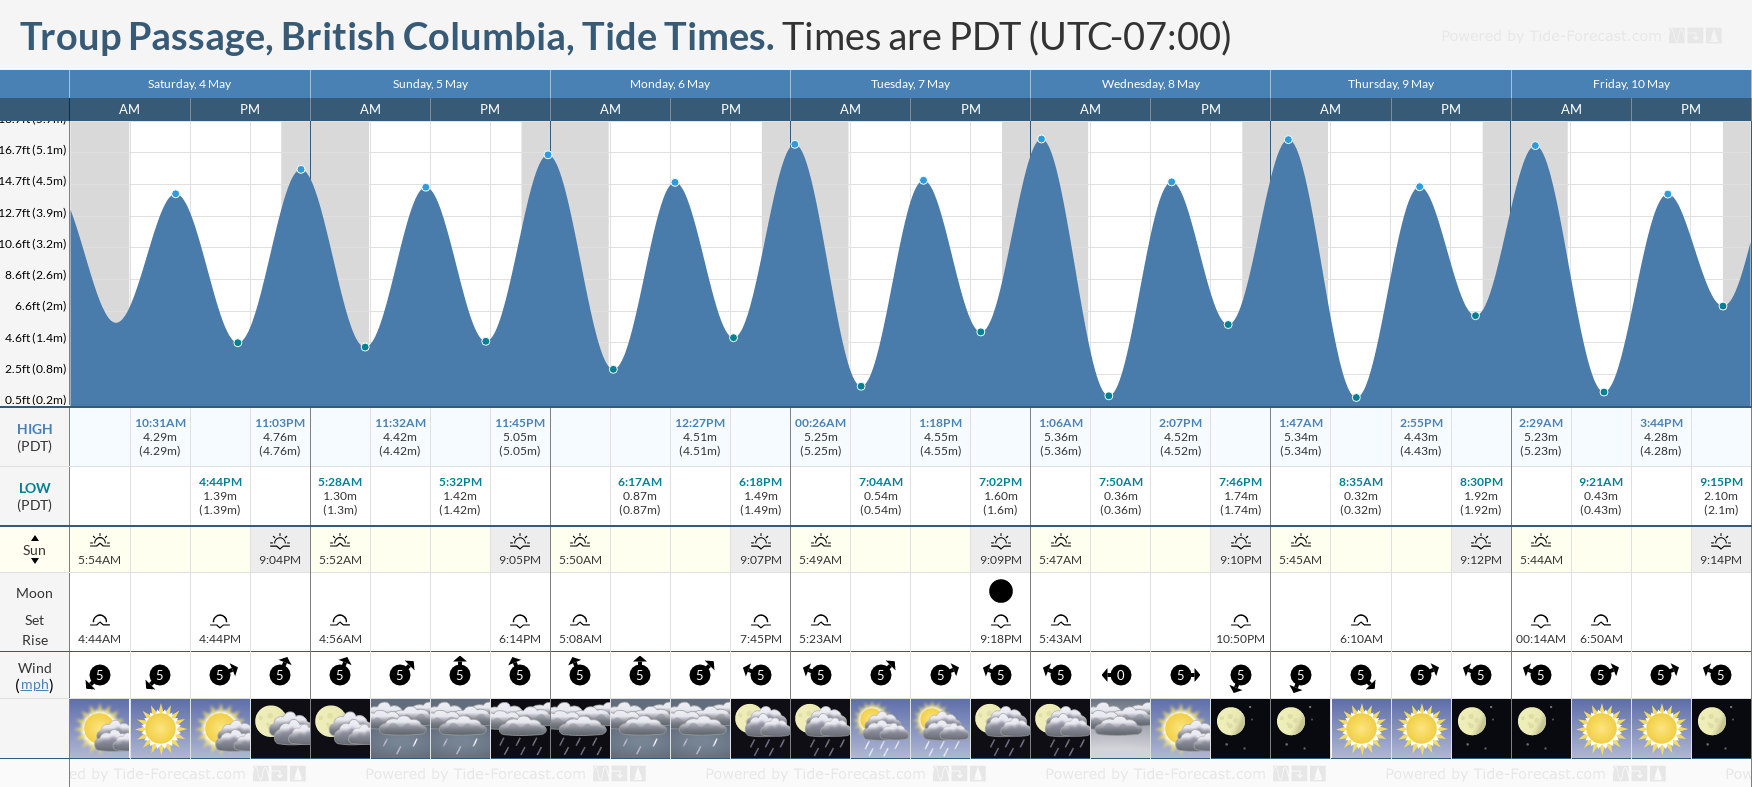 Troup Passage, British Columbia Tide Chart including high and low tide tide times for the next 7 days